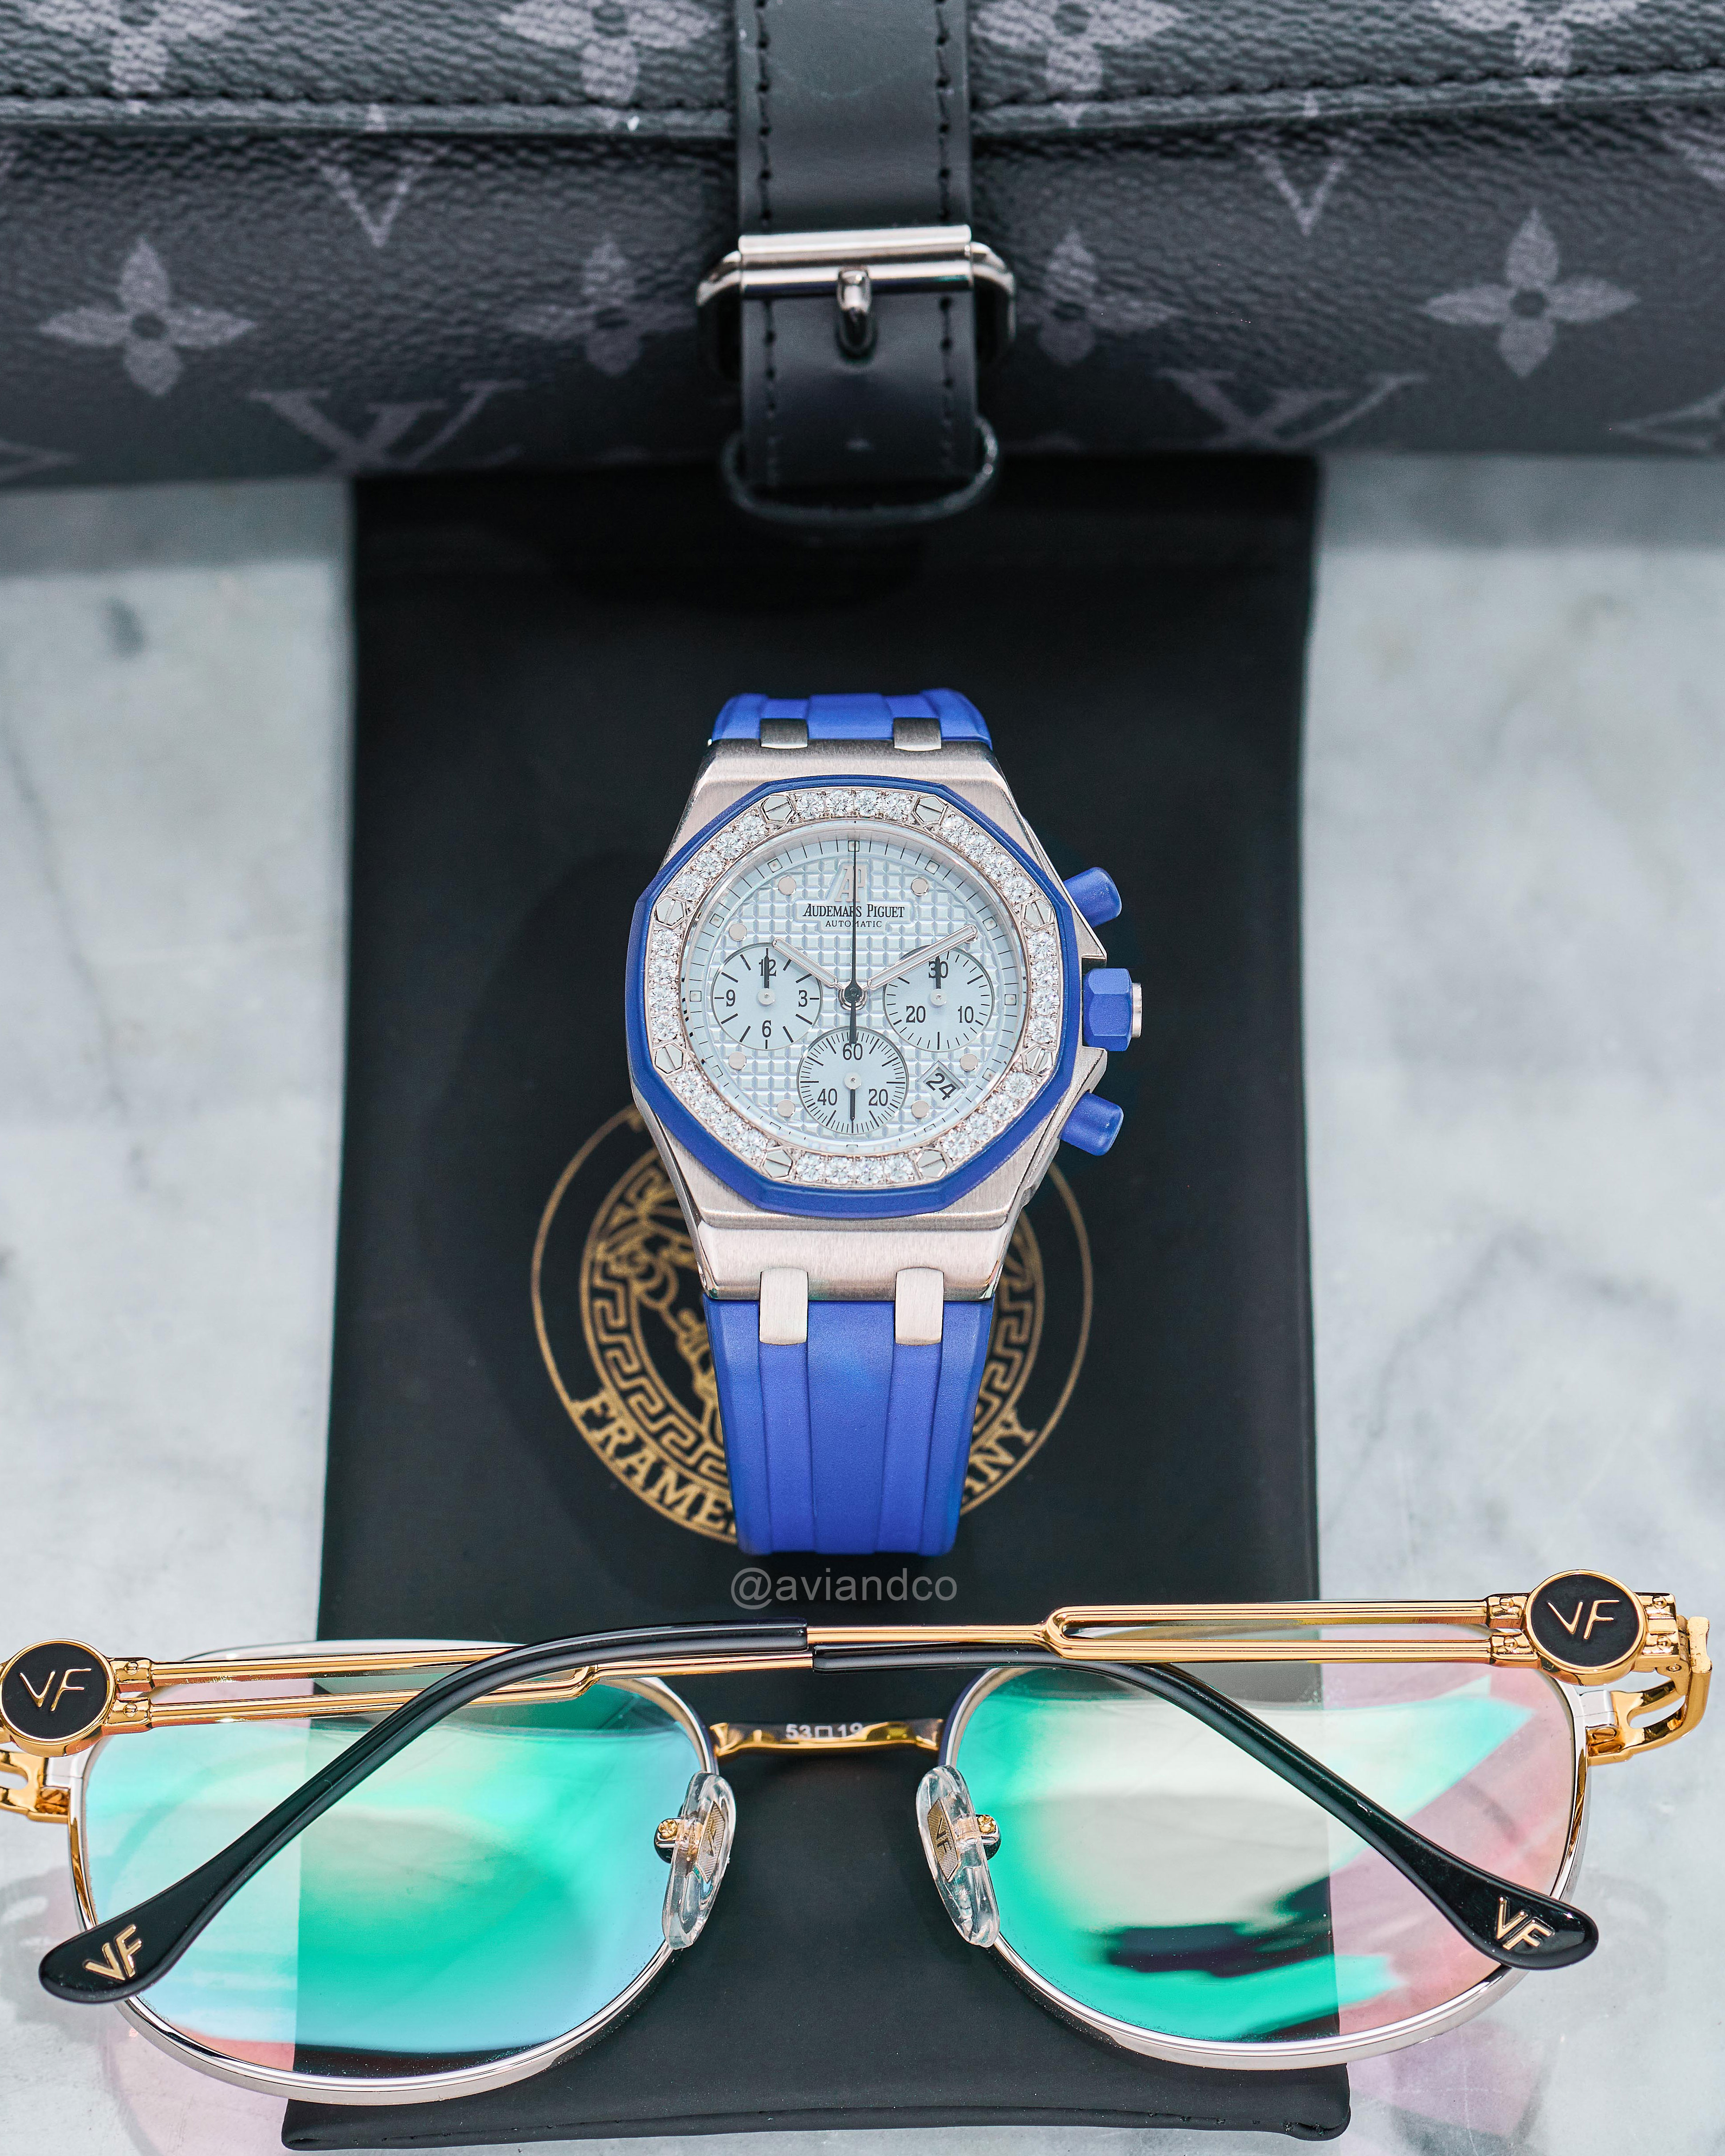 Diamond-Pave Bezel Timepiece with Blue Rubber Strap Beside a Louis Vuitton Bag and Iridescent Sunglasses.